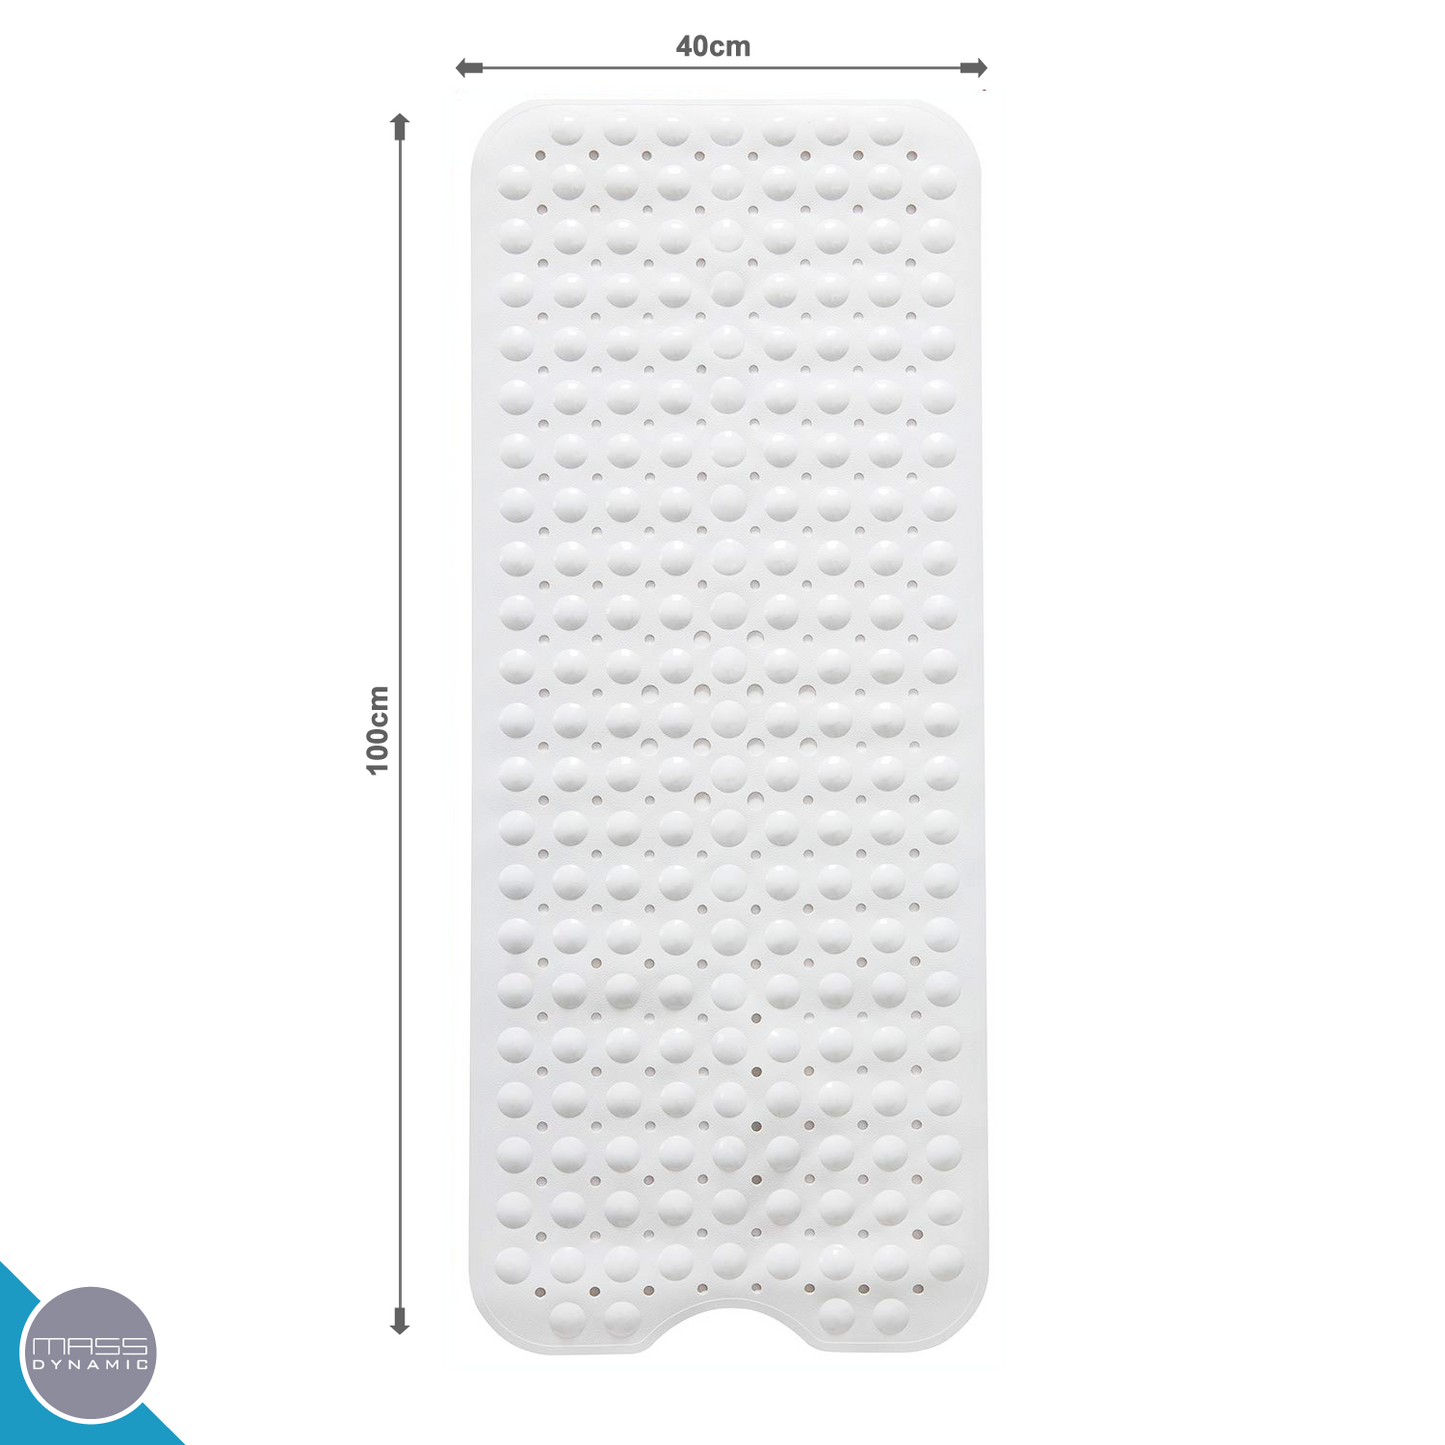 Non Slip Bath Mats Shower Mats with Anti Slip Suction Cups (Opaque White)